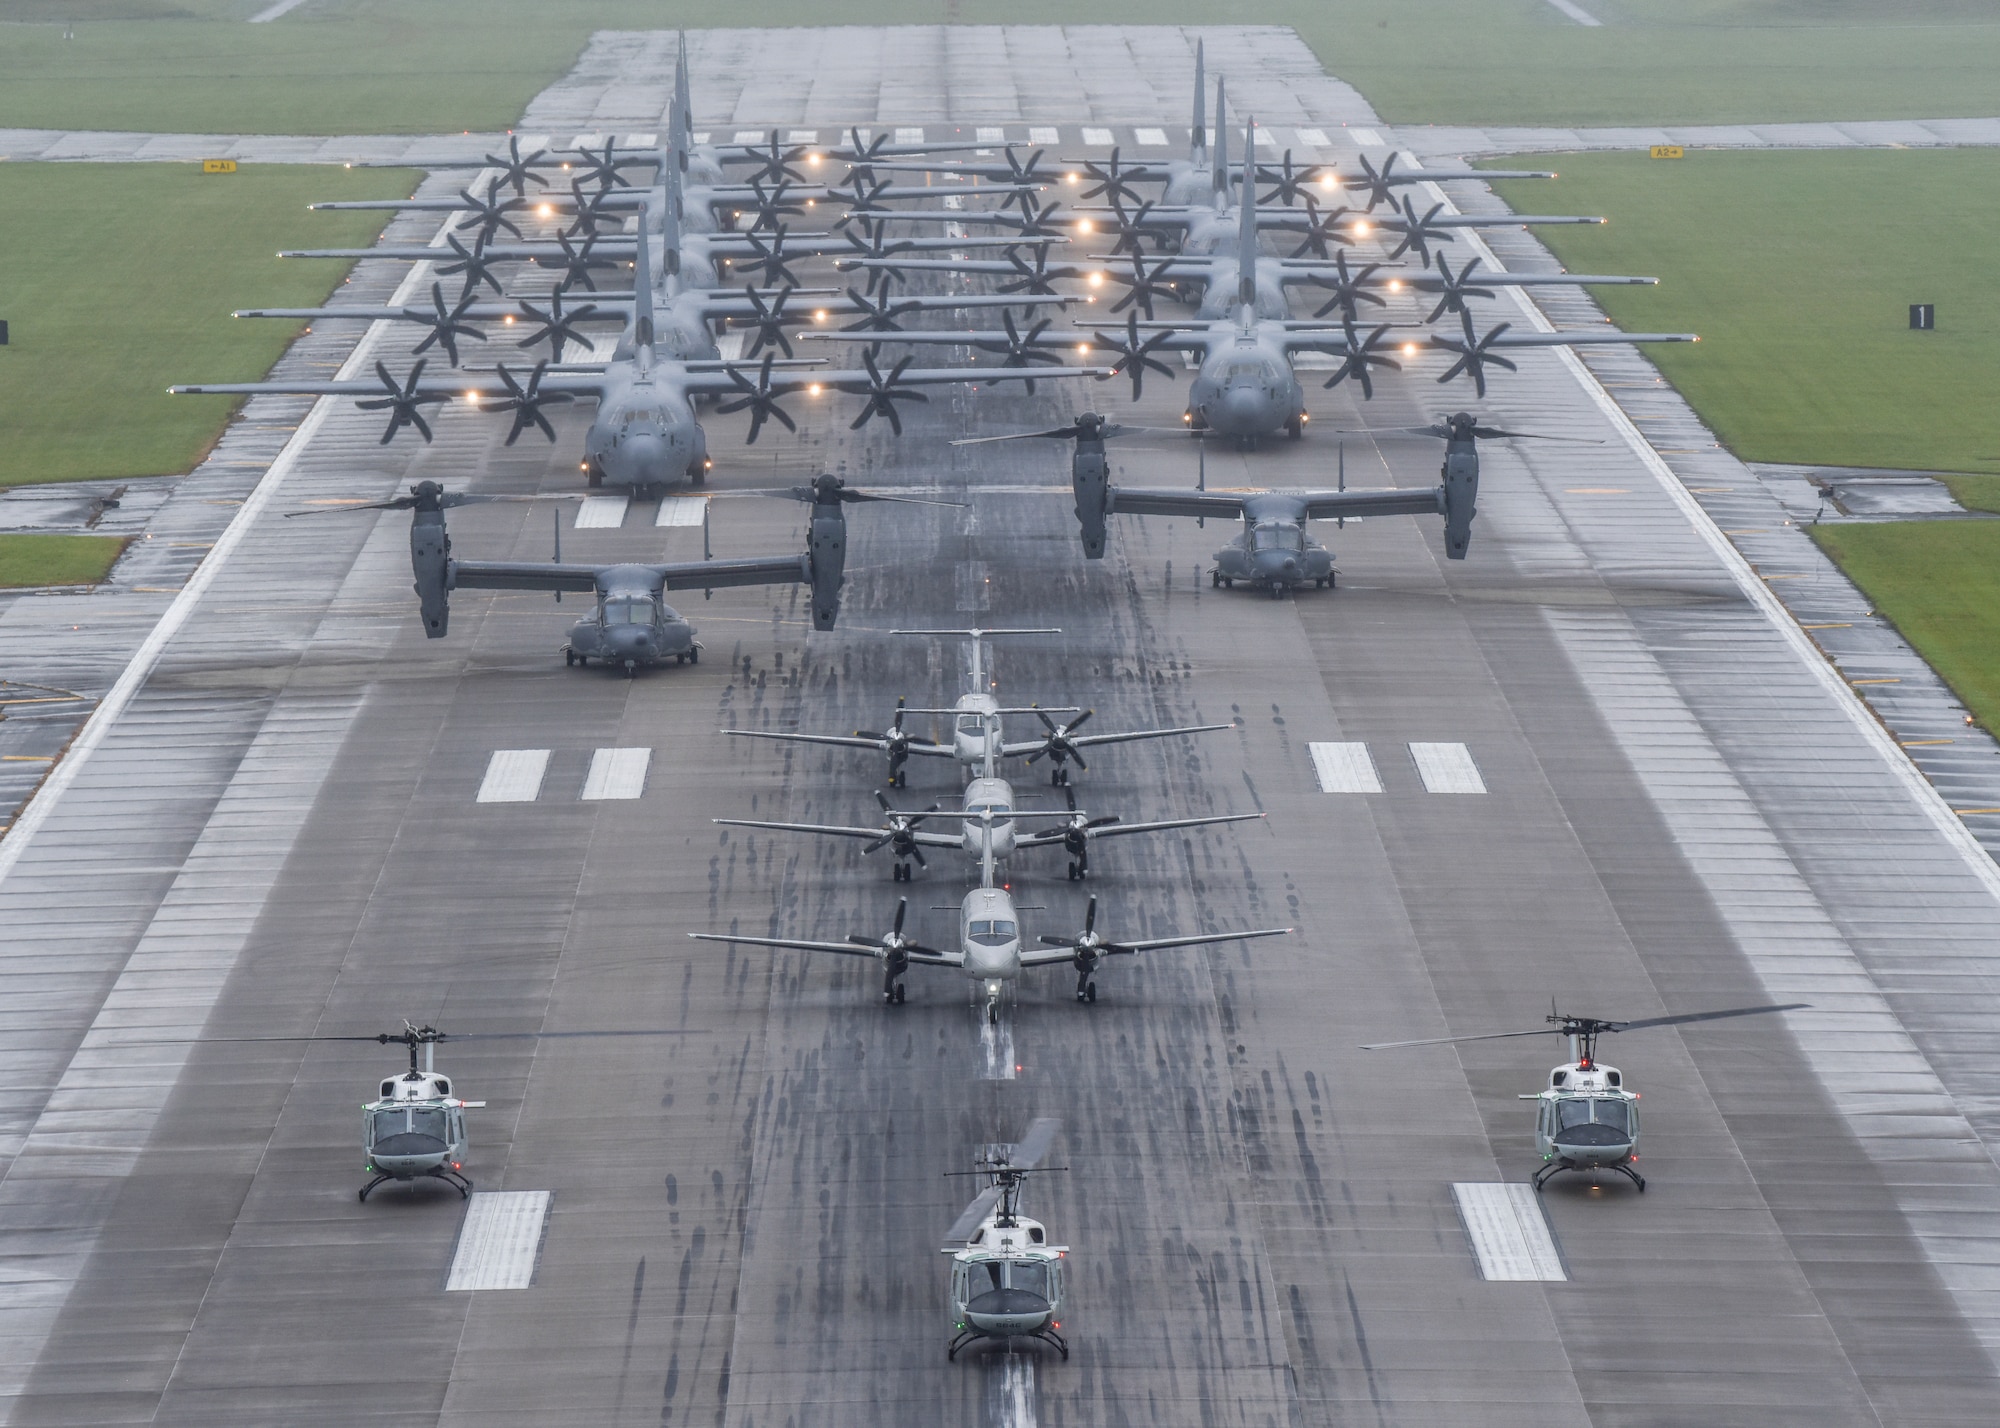 Aircraft from the 36th Airlift Squadron, 459th Airlift Squadron and 21st Special Operations Squadron participate in the elephant walk portion of the Samurai Surge training exercise, May 21, 2020, at Yokota Air Base, Japan.